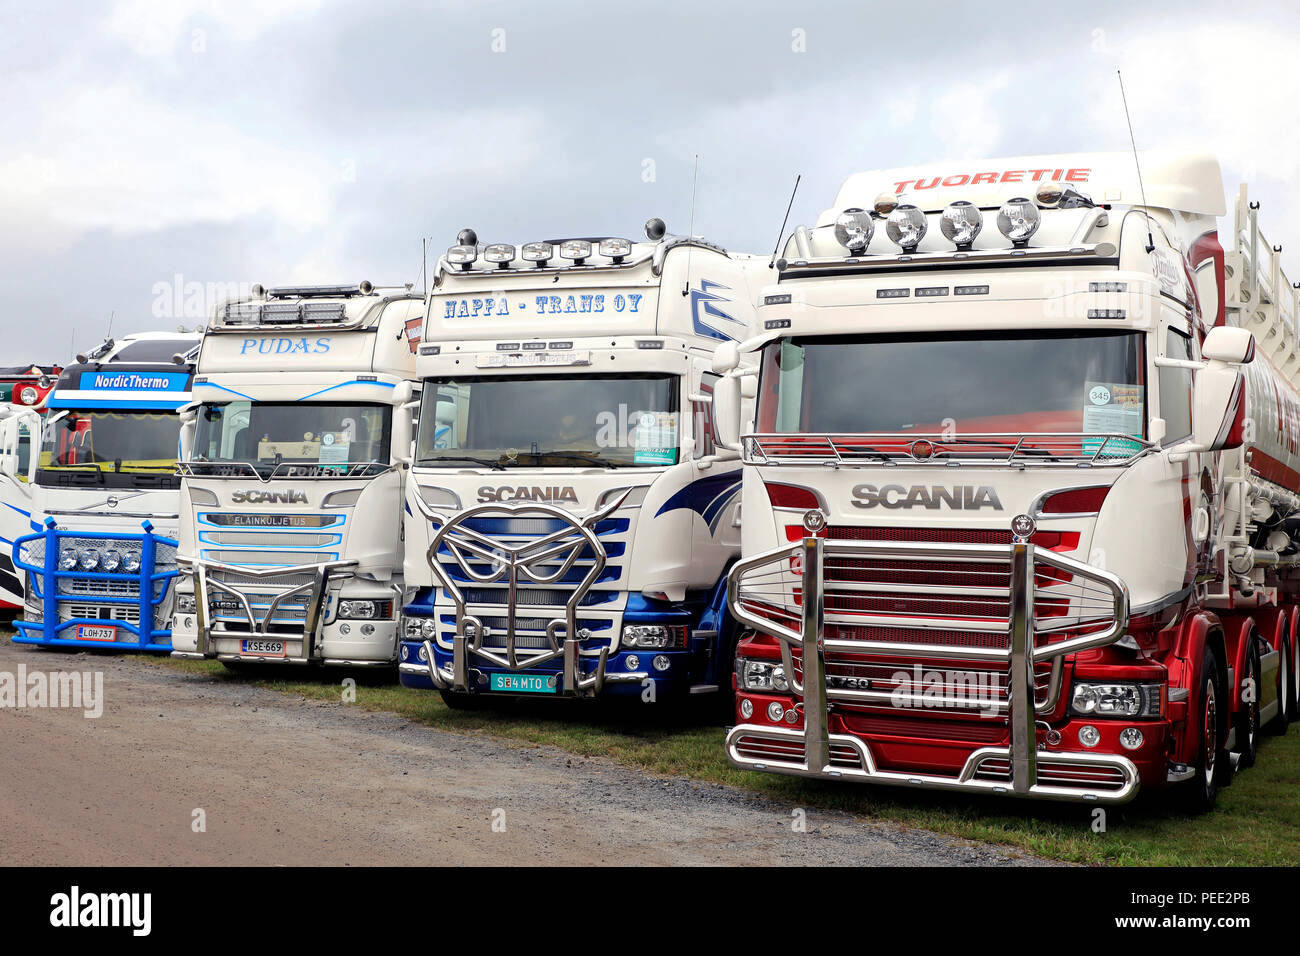 ALAHARMA, FINLAND - AUGUST 10, 2018: Bull bars of different design in front of Scania and Volvo semi trucks on Power Truck Show 2018. Stock Photo